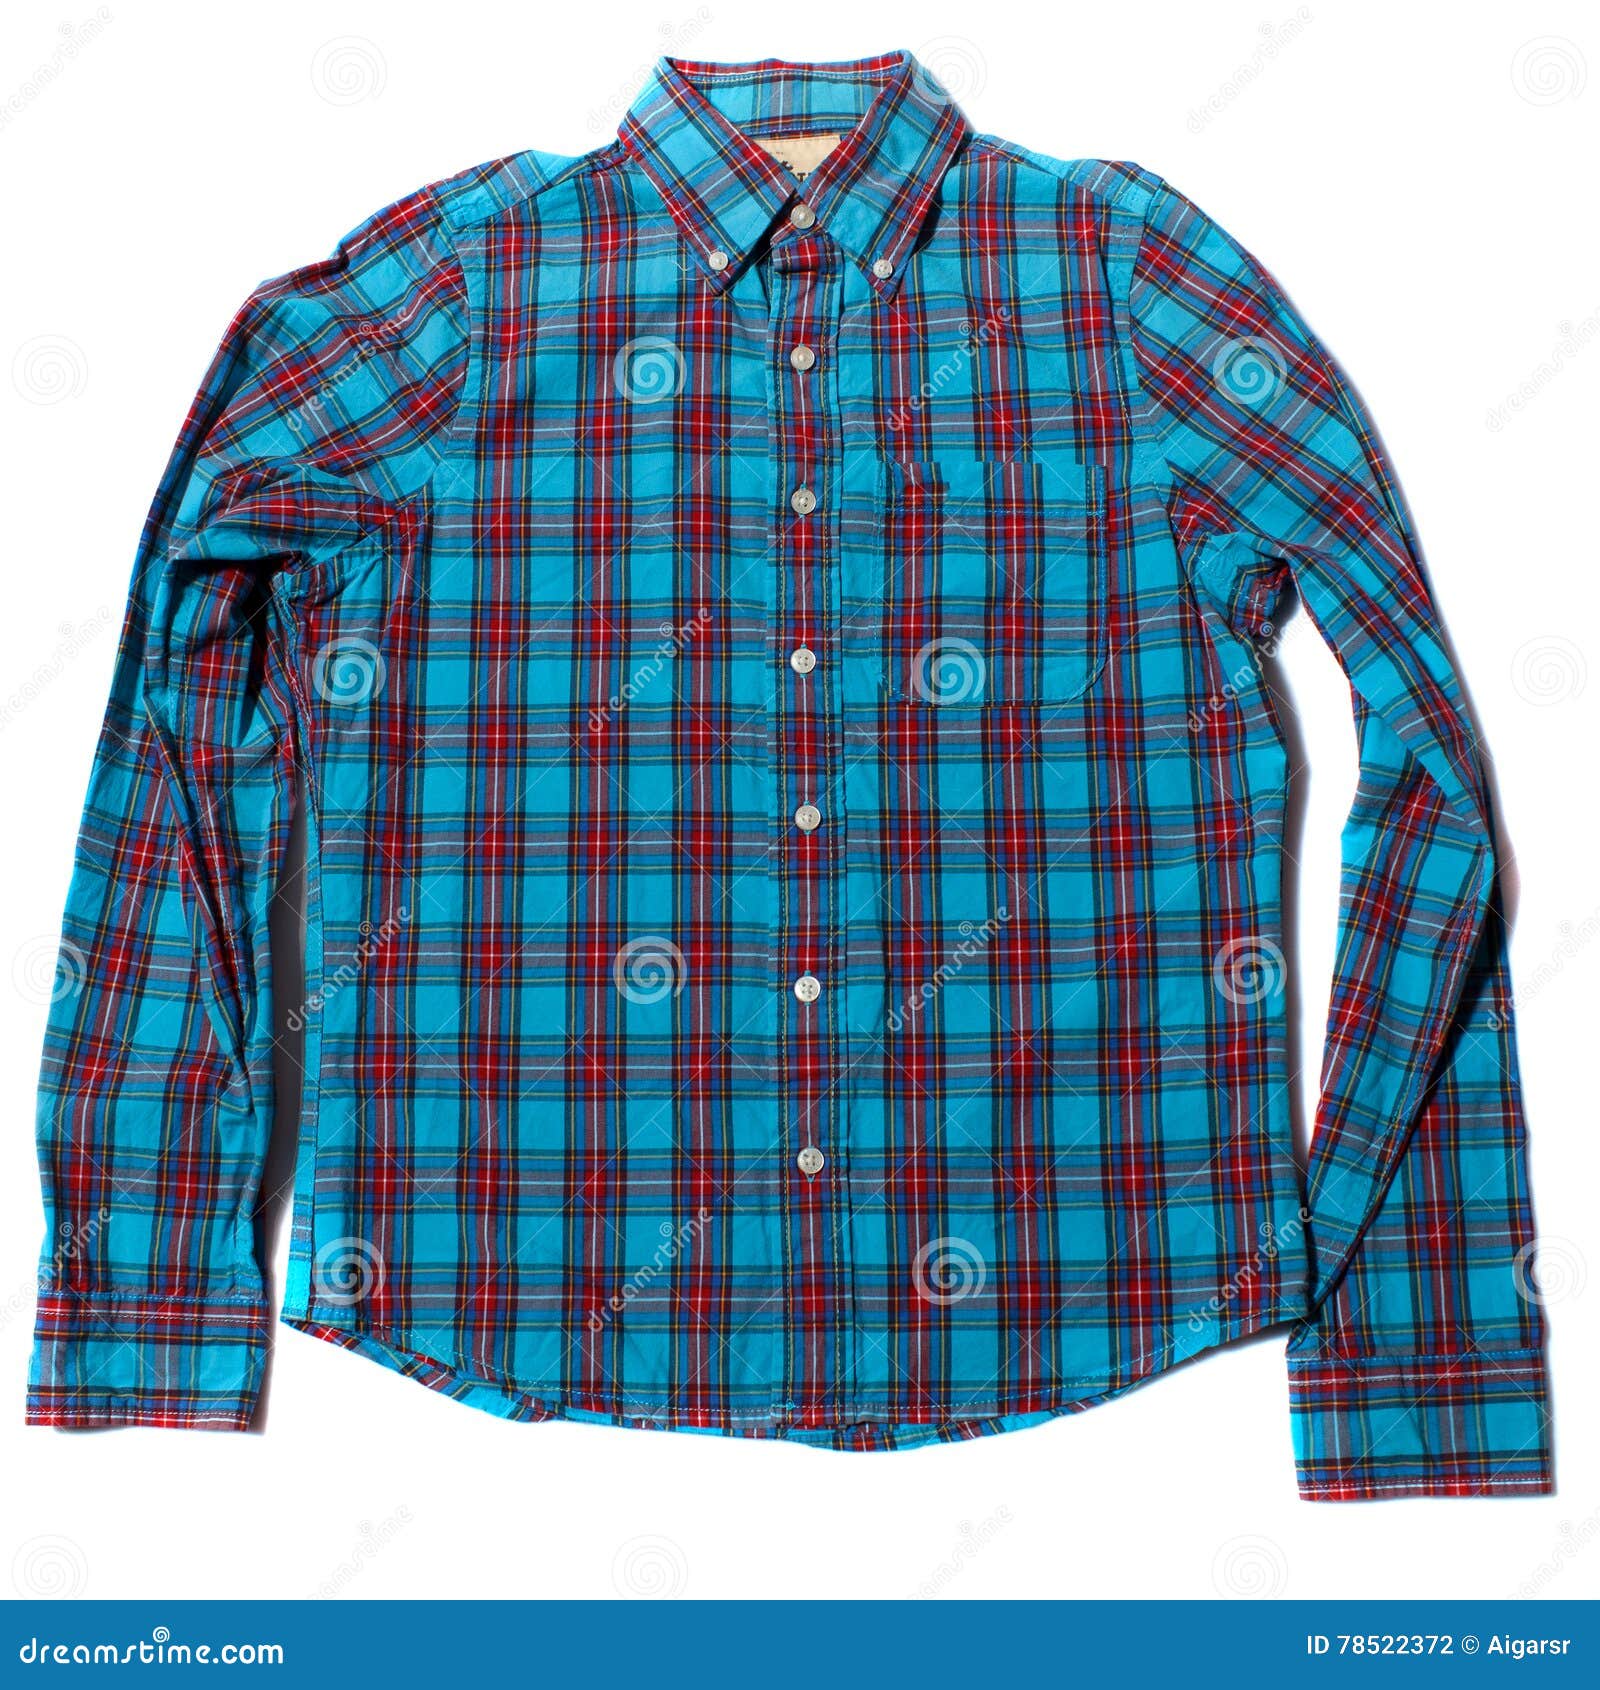 Red and blue shirt stock photo. Image of background, flannel - 78522372